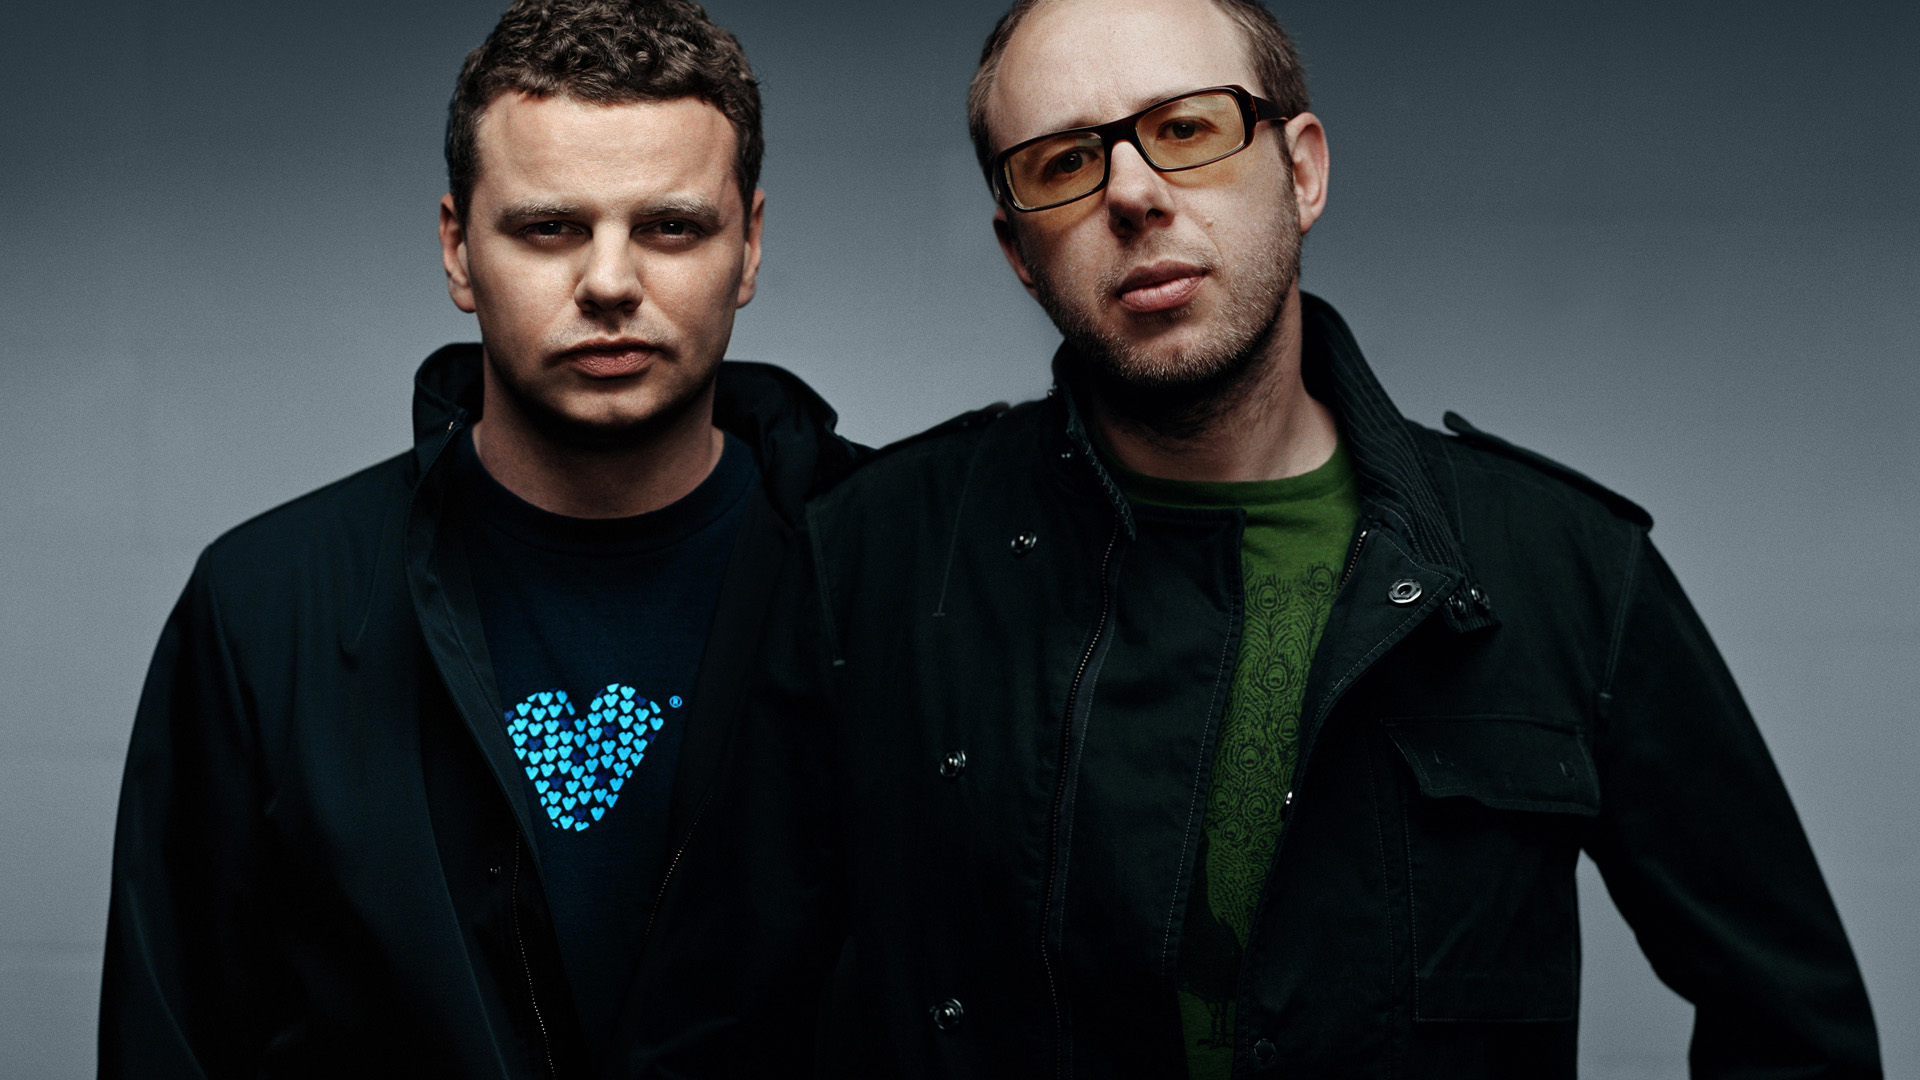 Nice Images Collection: The Chemical Brothers Desktop Wallpapers